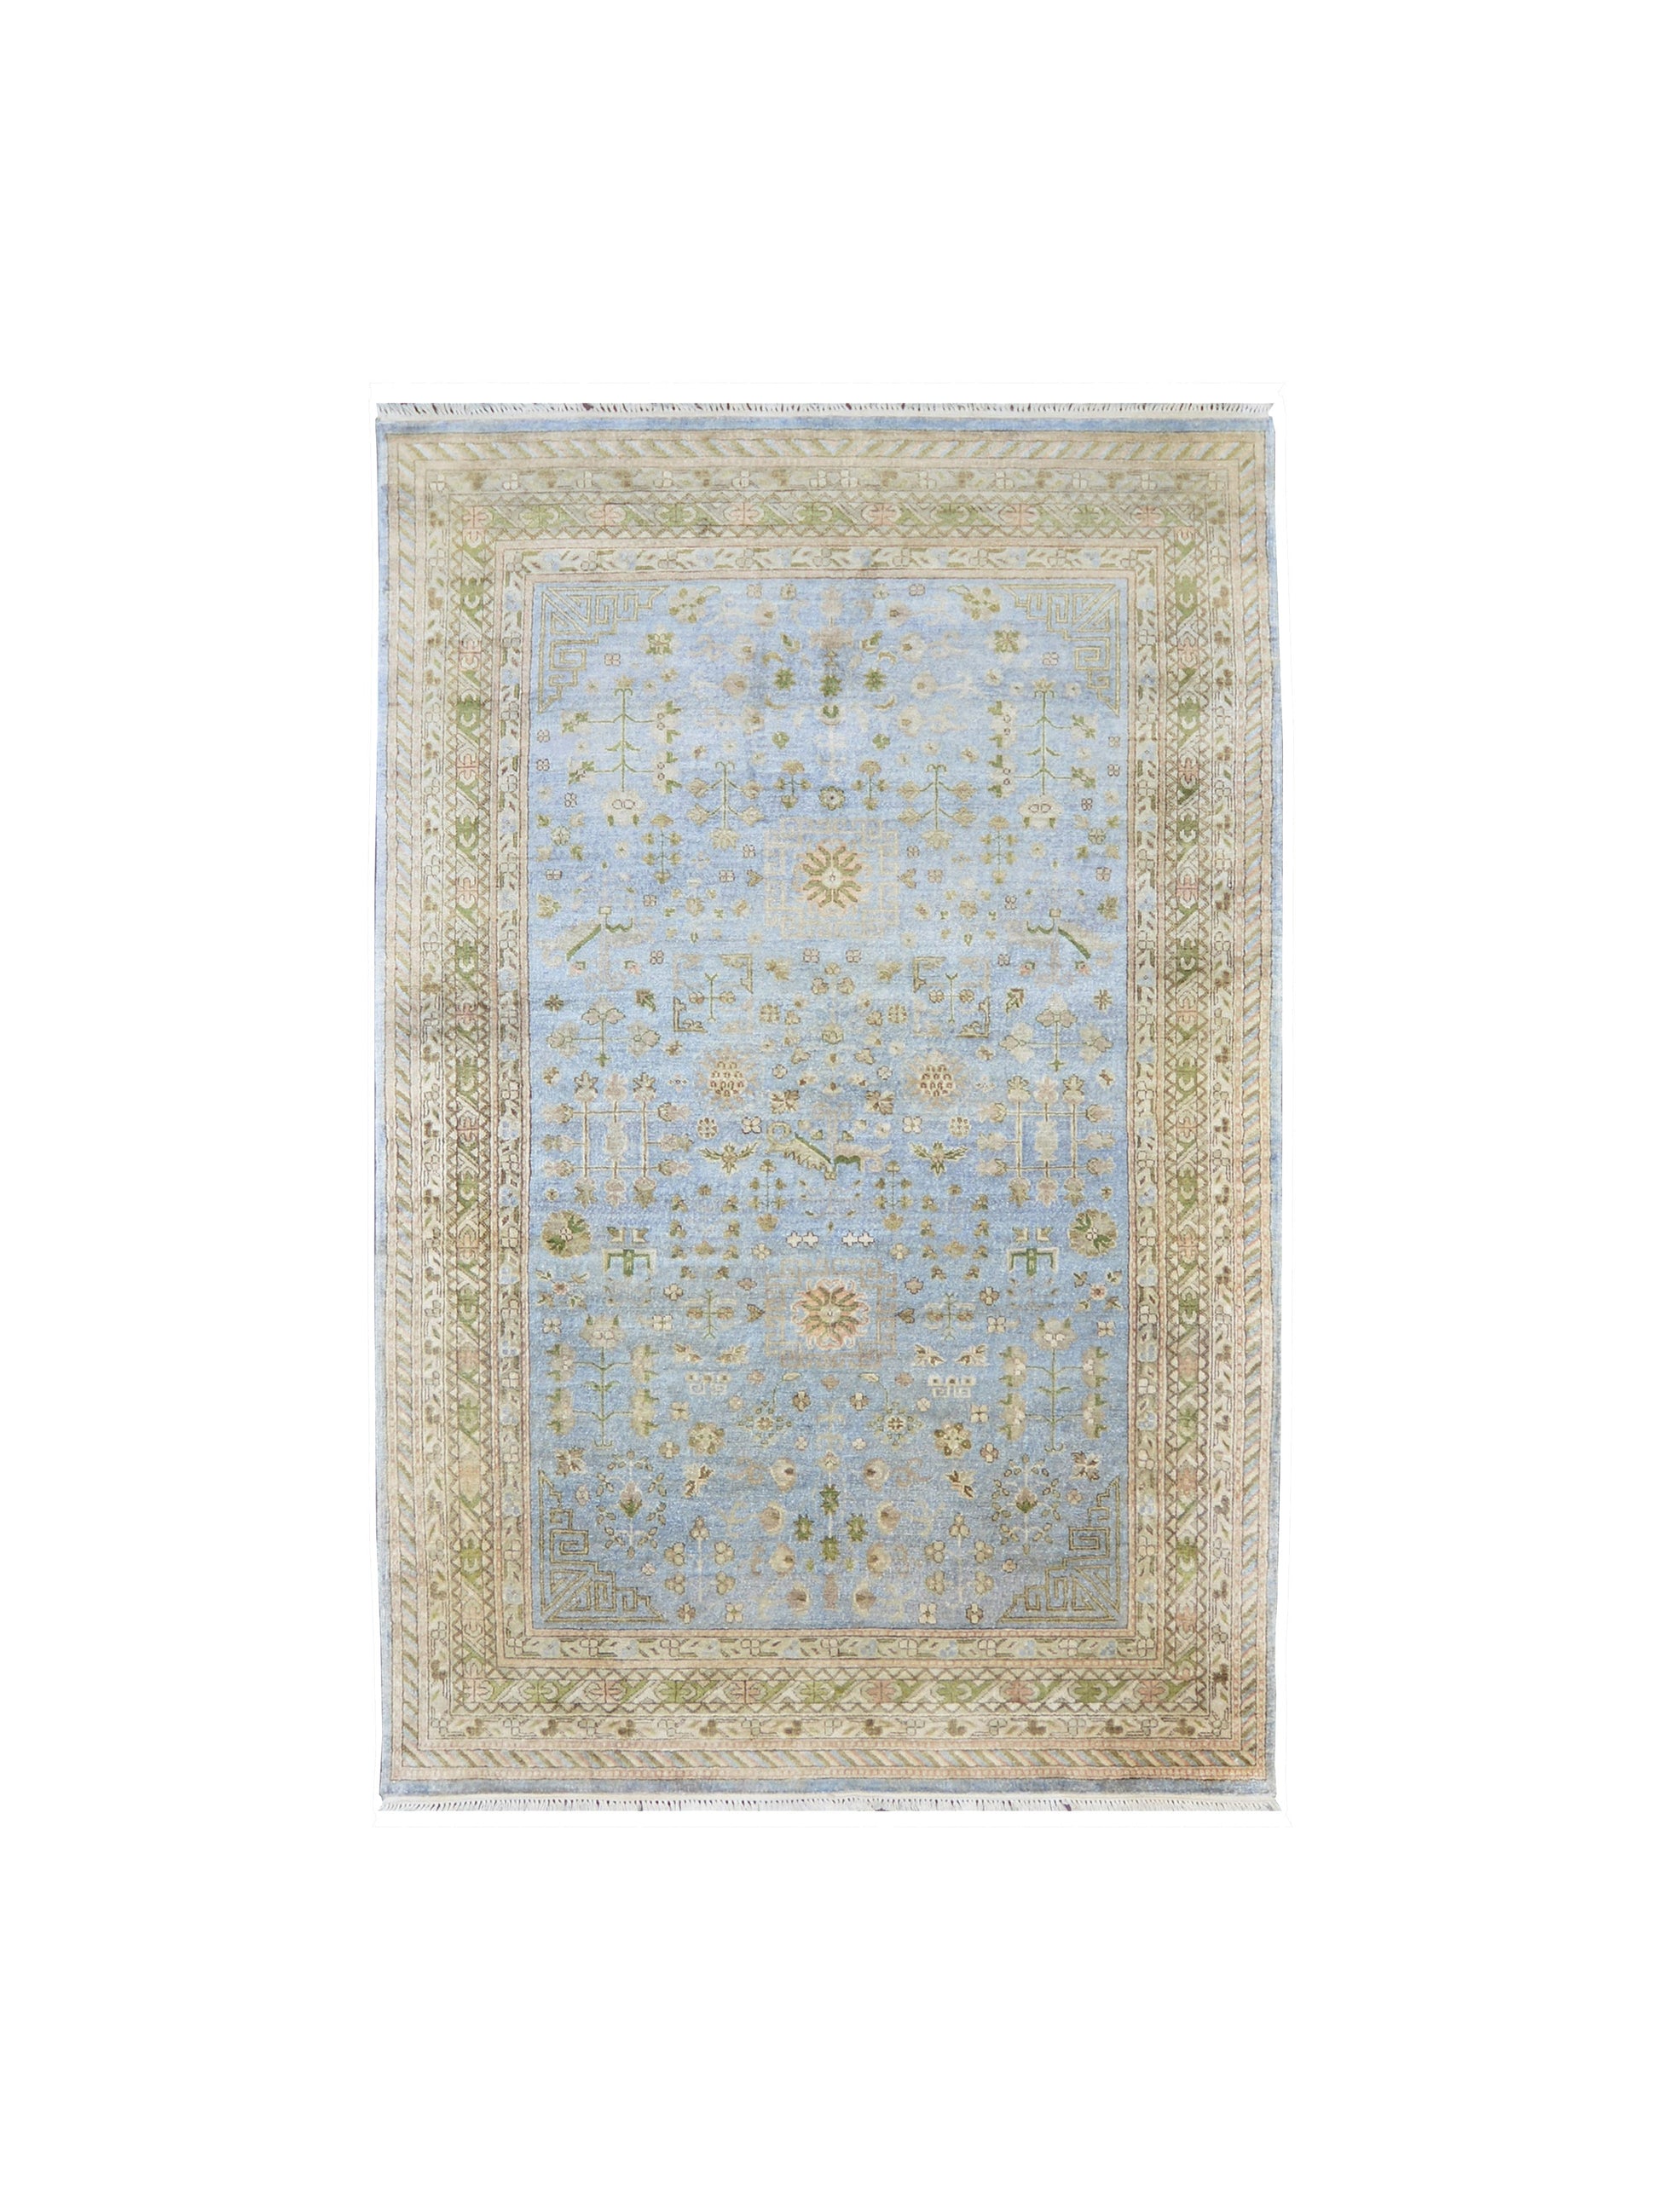 Get trendy with Blue and Camel Pure Silk Tabriz Traditional Handknotted Area Rug 5.9x9.0ft 175X273Cms - Traditional Rugs available at Jaipur Oriental Rugs. Grab yours for $3726.00 today!